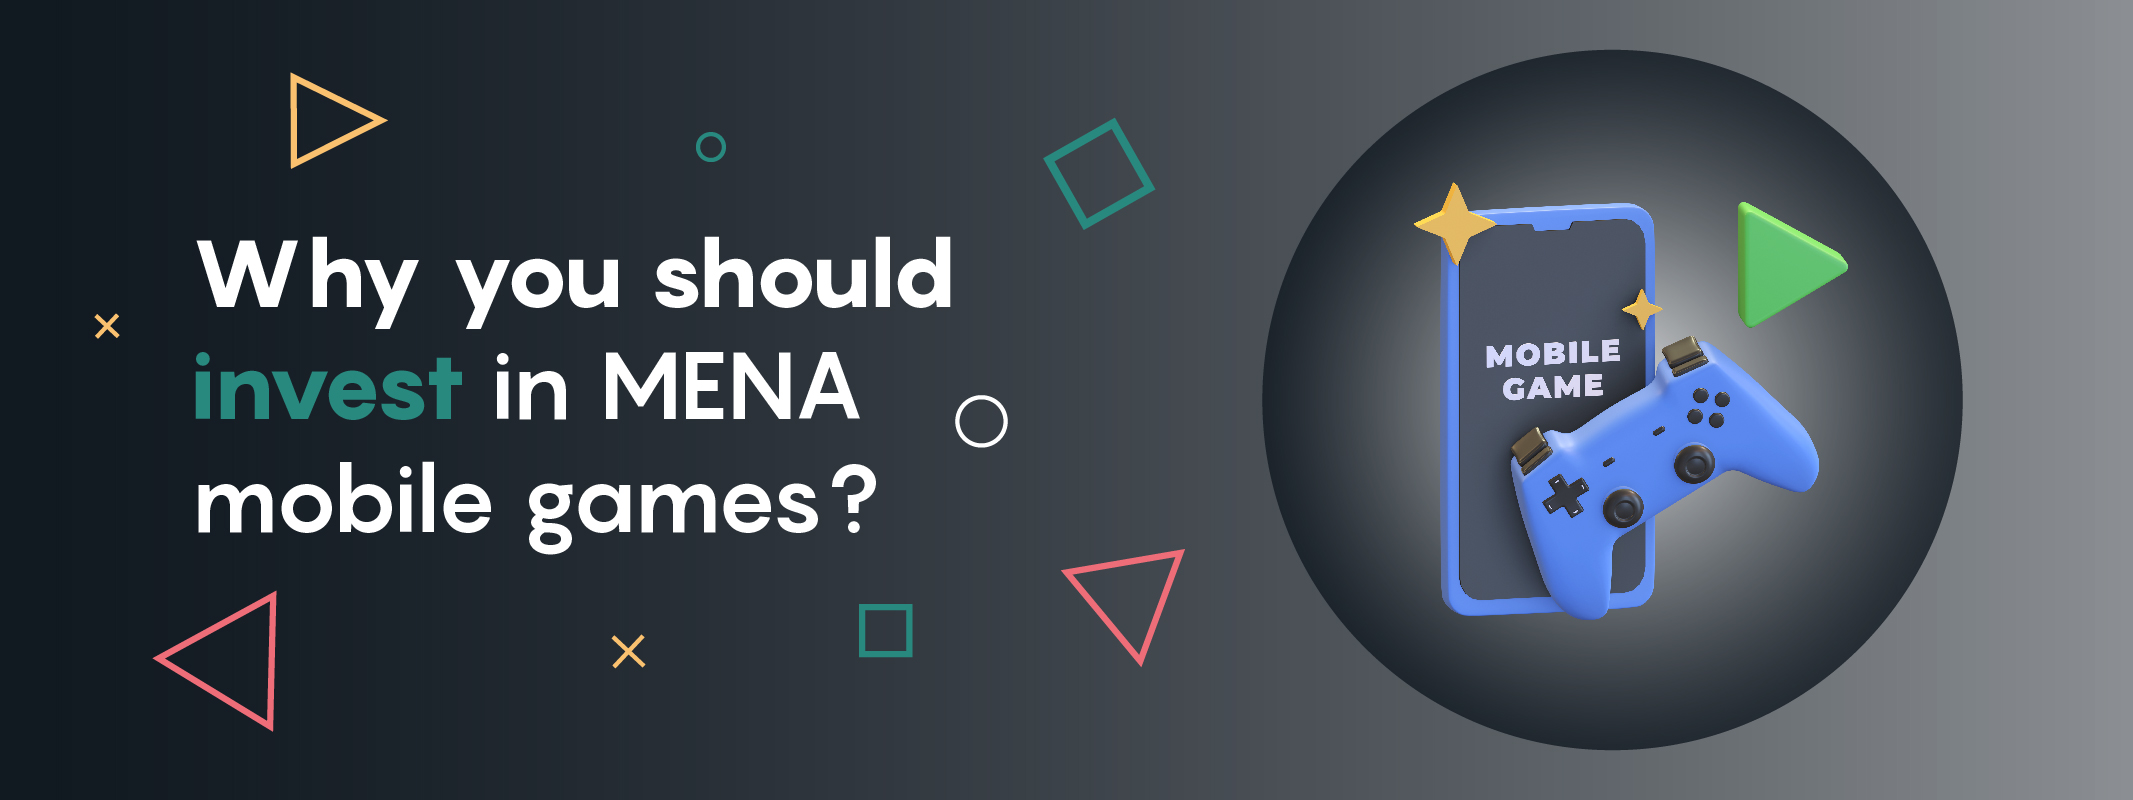 Why You Should Invest in MENA Mobile Games?